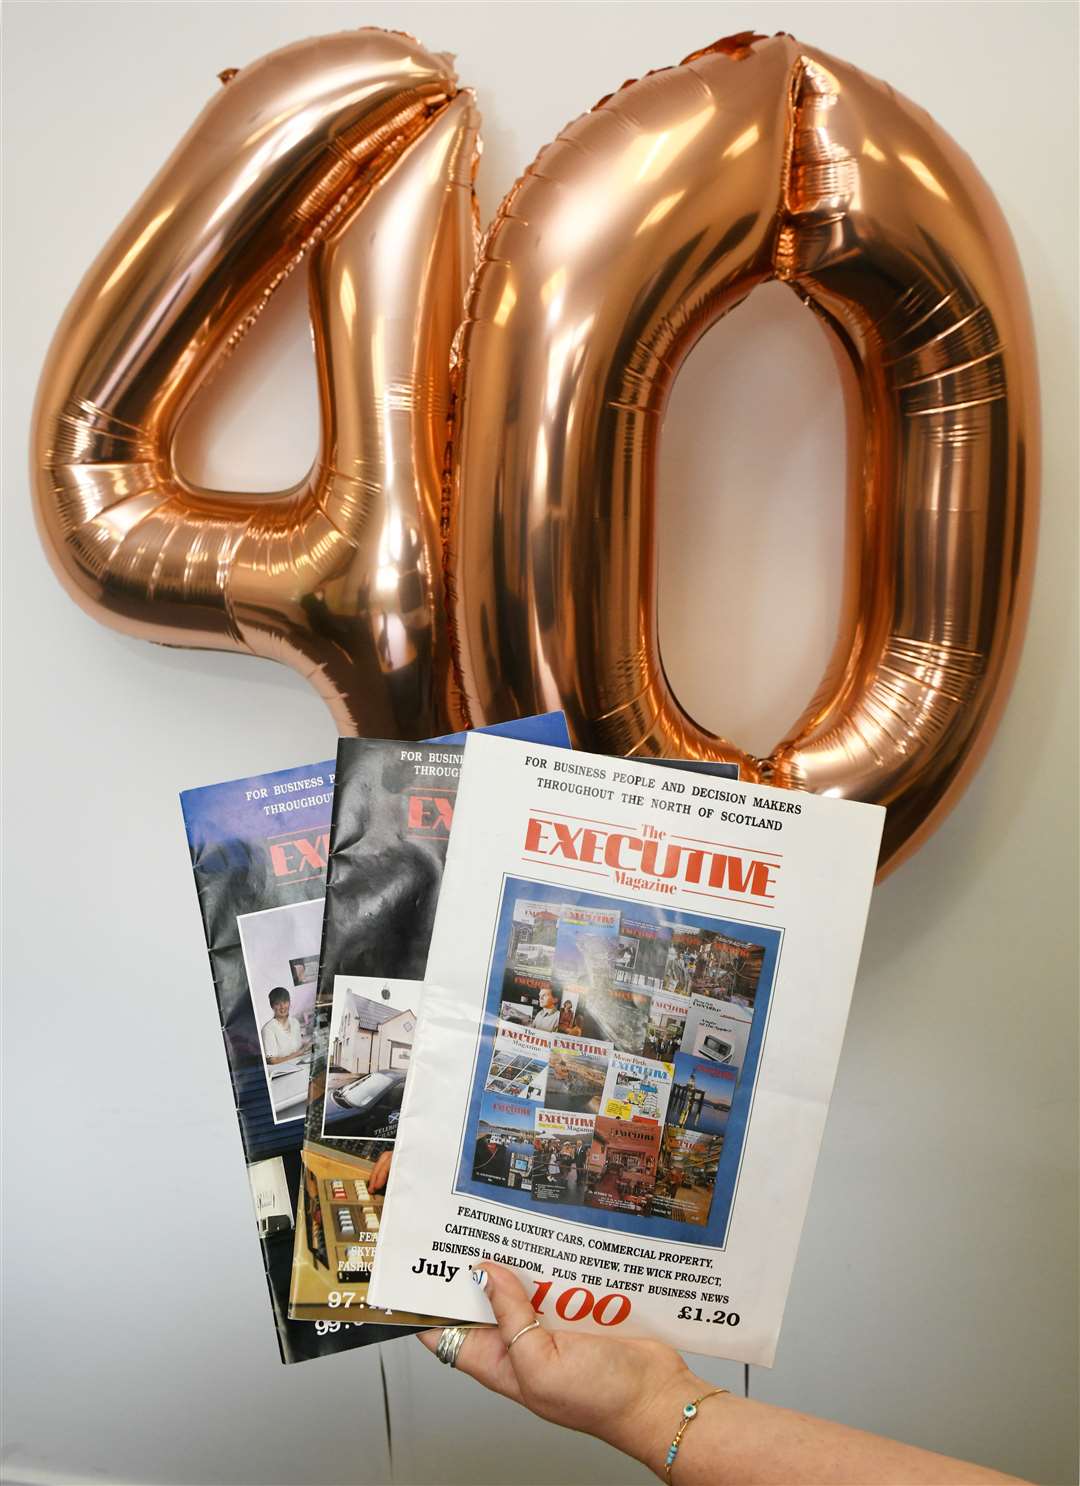 Executive magazines in front of "40" balloons. Picture: James Mackenzie.